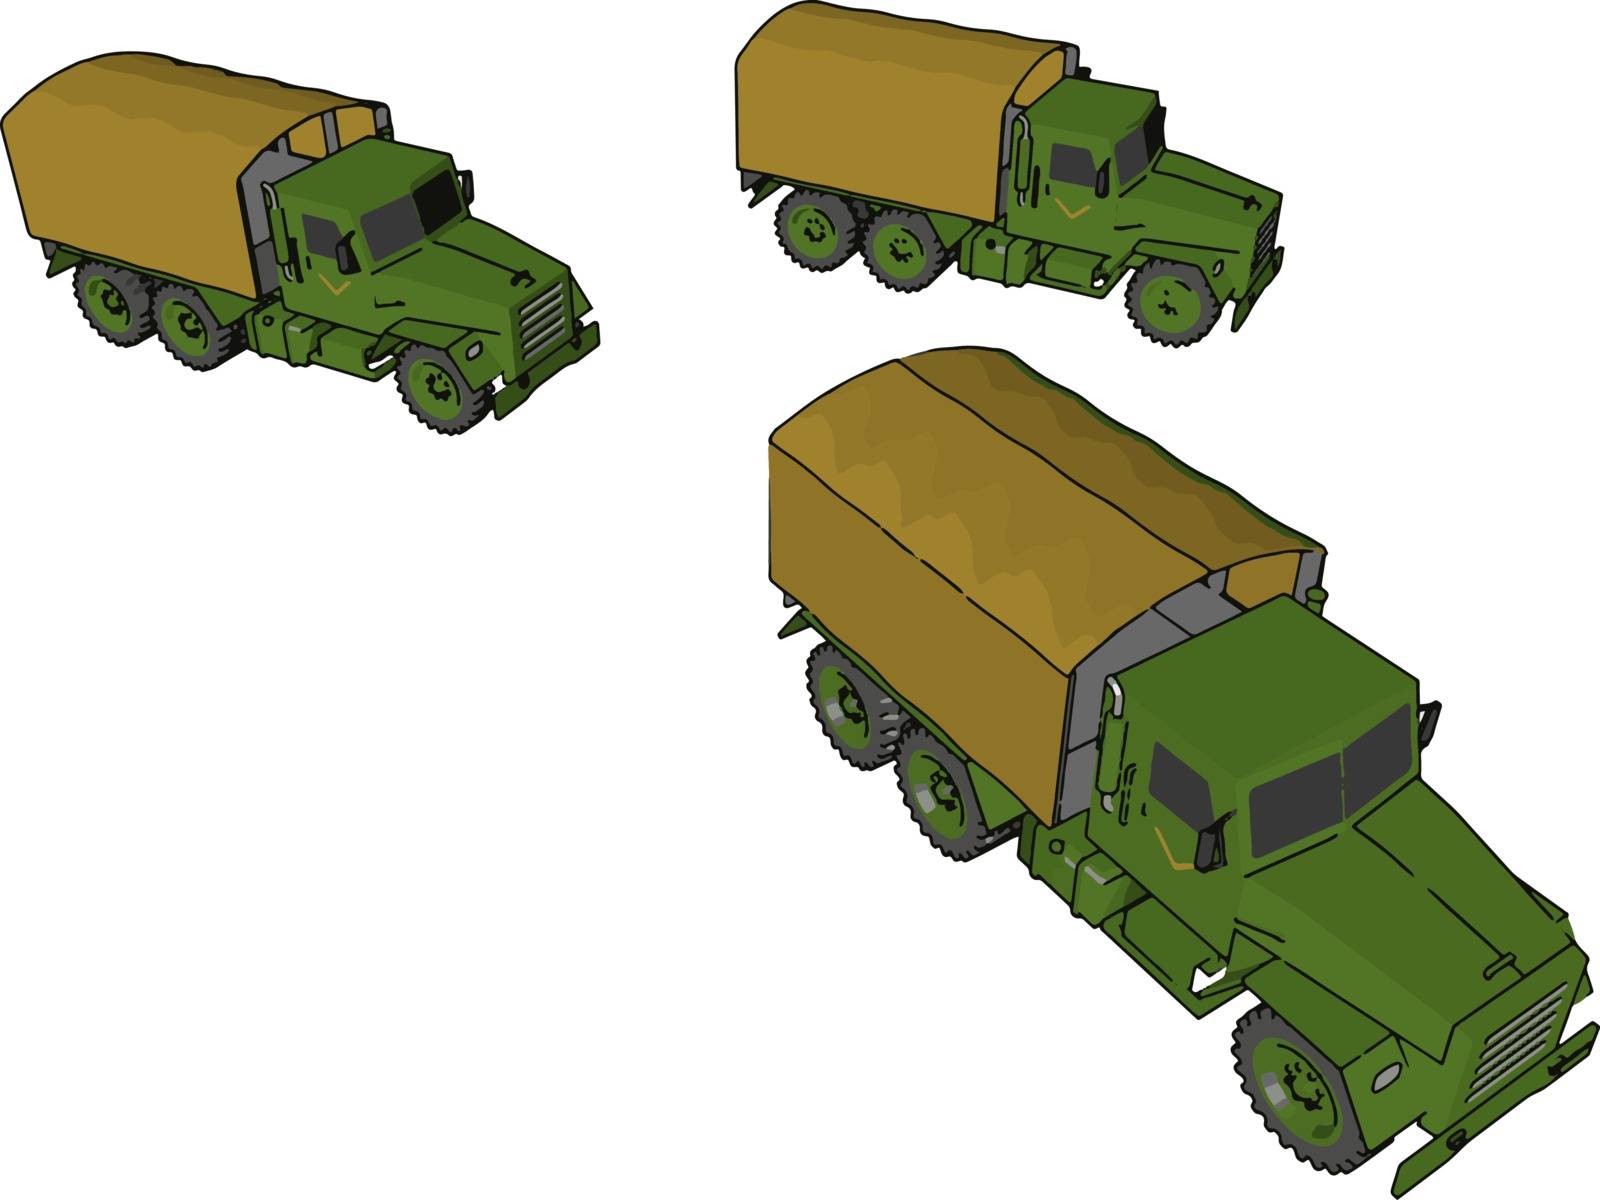 Truck like large vehicle used by army or military to travel on official duty vector color drawing or illustration